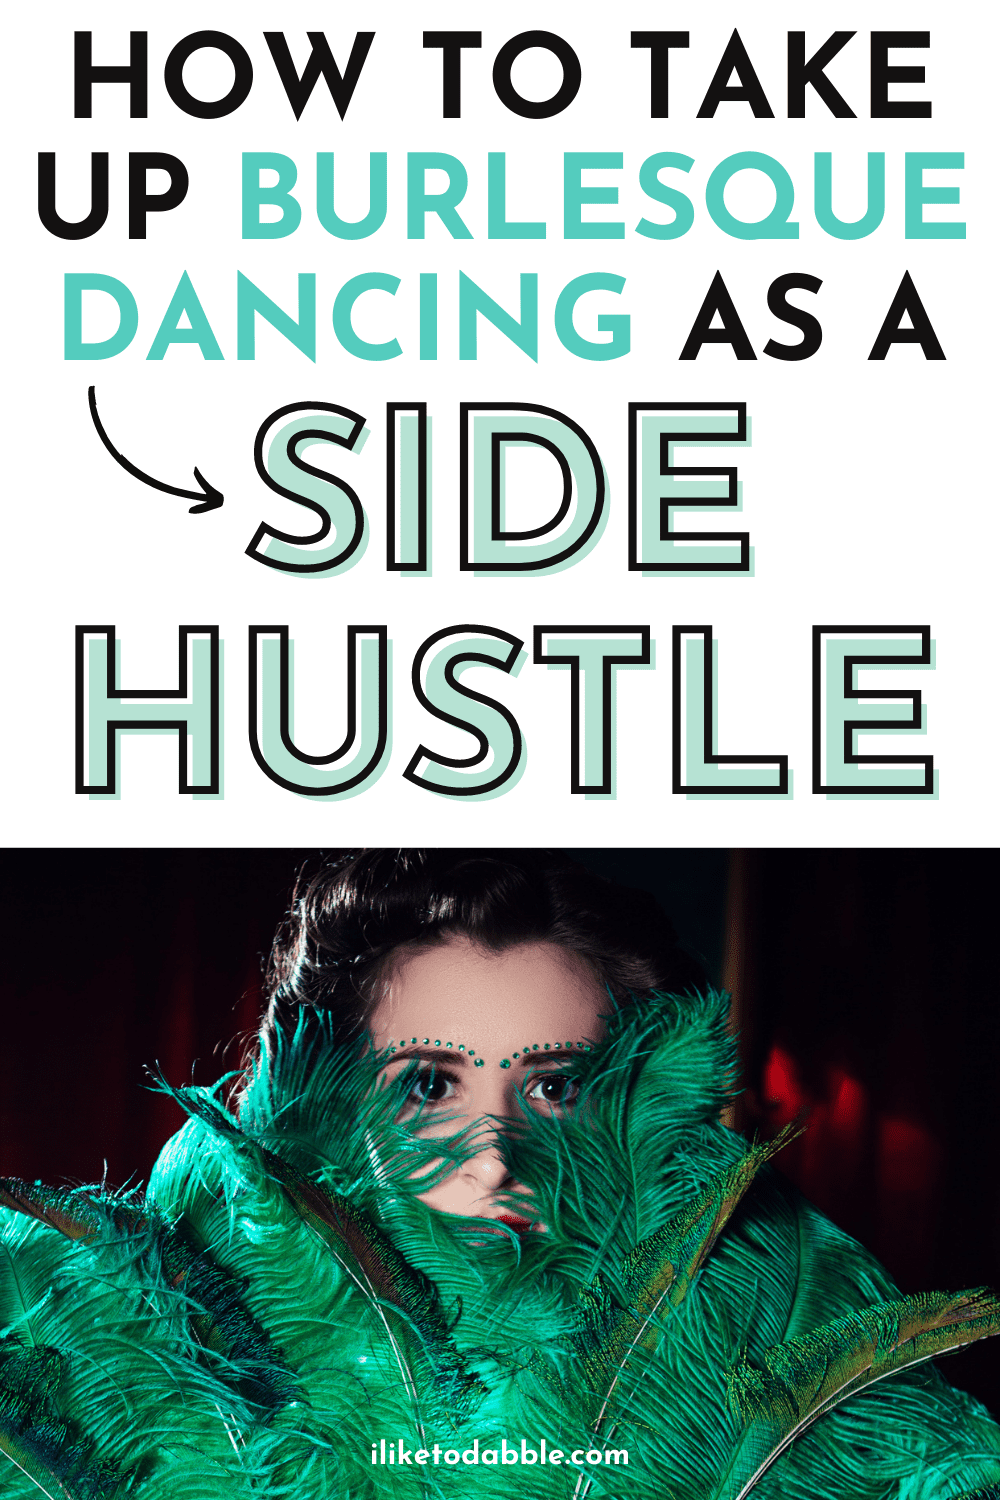 burlesque dancer with title text overlay